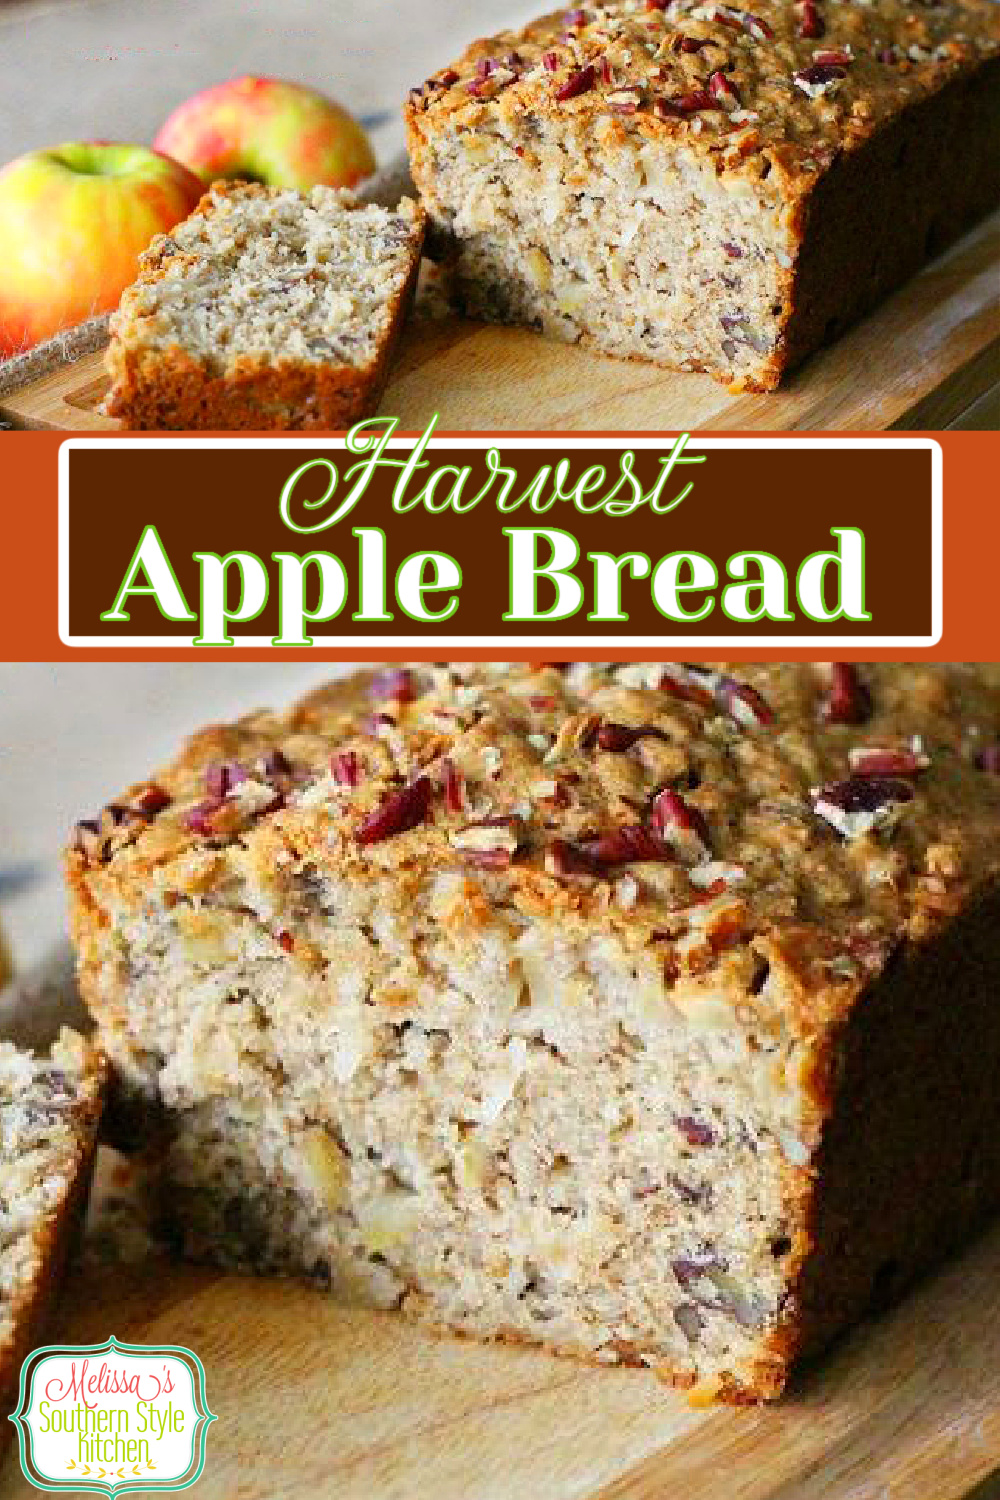 This pecan filled Harvest Apple Bread is a true delight with a cup of coffee or tea #applebread #apples #appledesserts #quickbreadrecipes #homemadebread #breadrecipes #harvest #brunch #breakfast #dessertfoodrecipes #southernfood #southernrecipes via @melissasssk